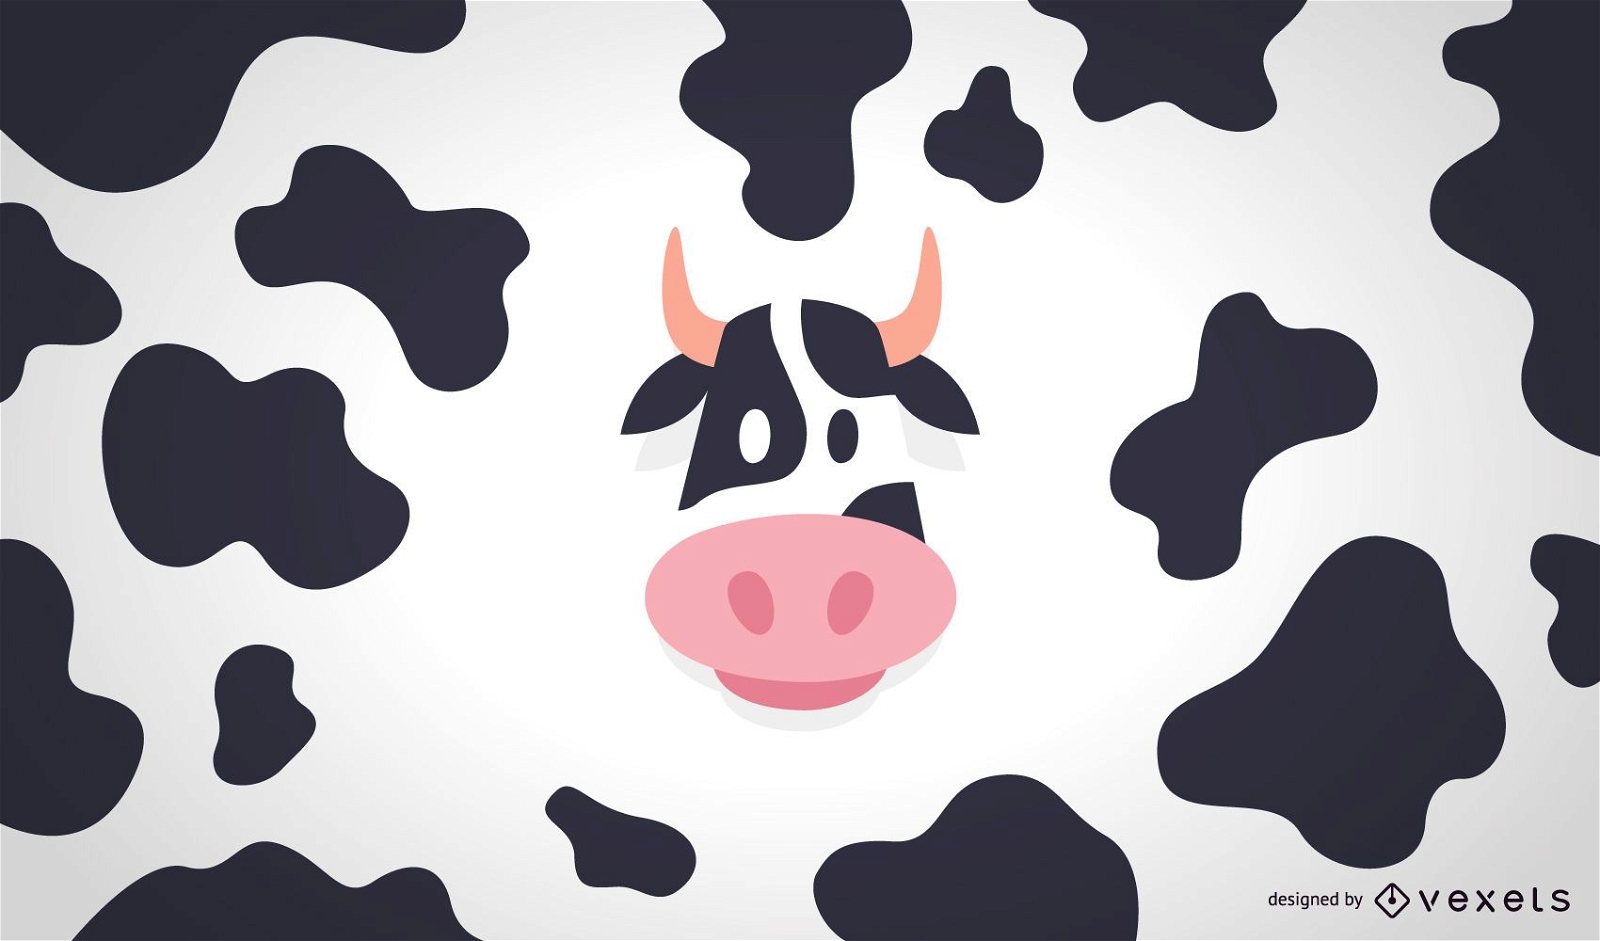 Flat cow illustration and pattern